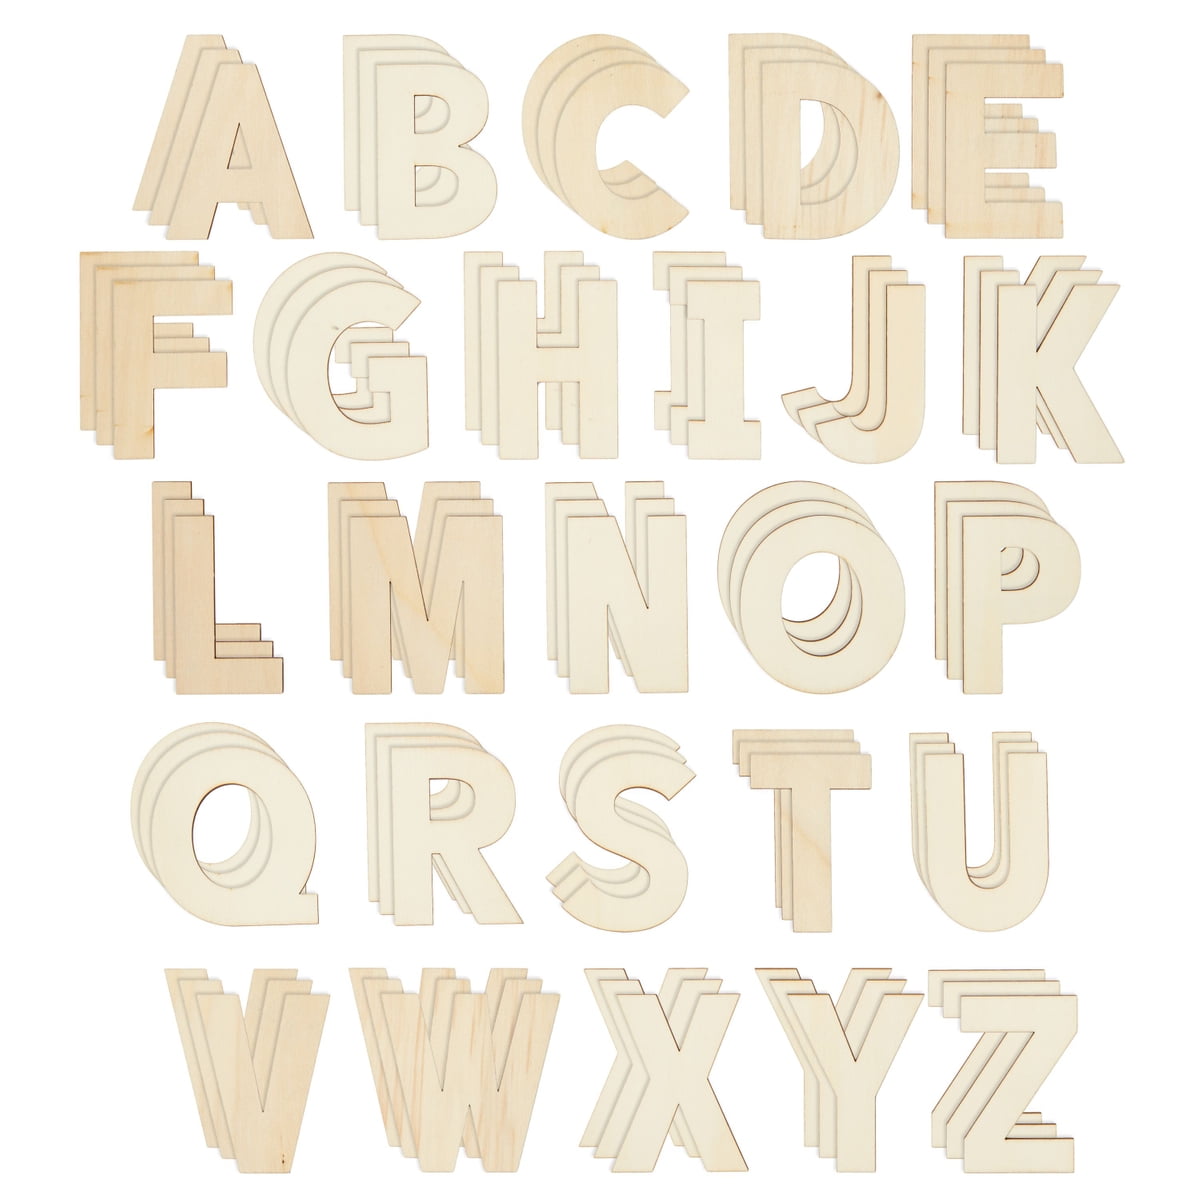 Bright Creations 83 Piece Wooden Letters for Crafts, 4-Inch Alphabet Cutouts for DIY Painting, Crafts, Wall Decorations